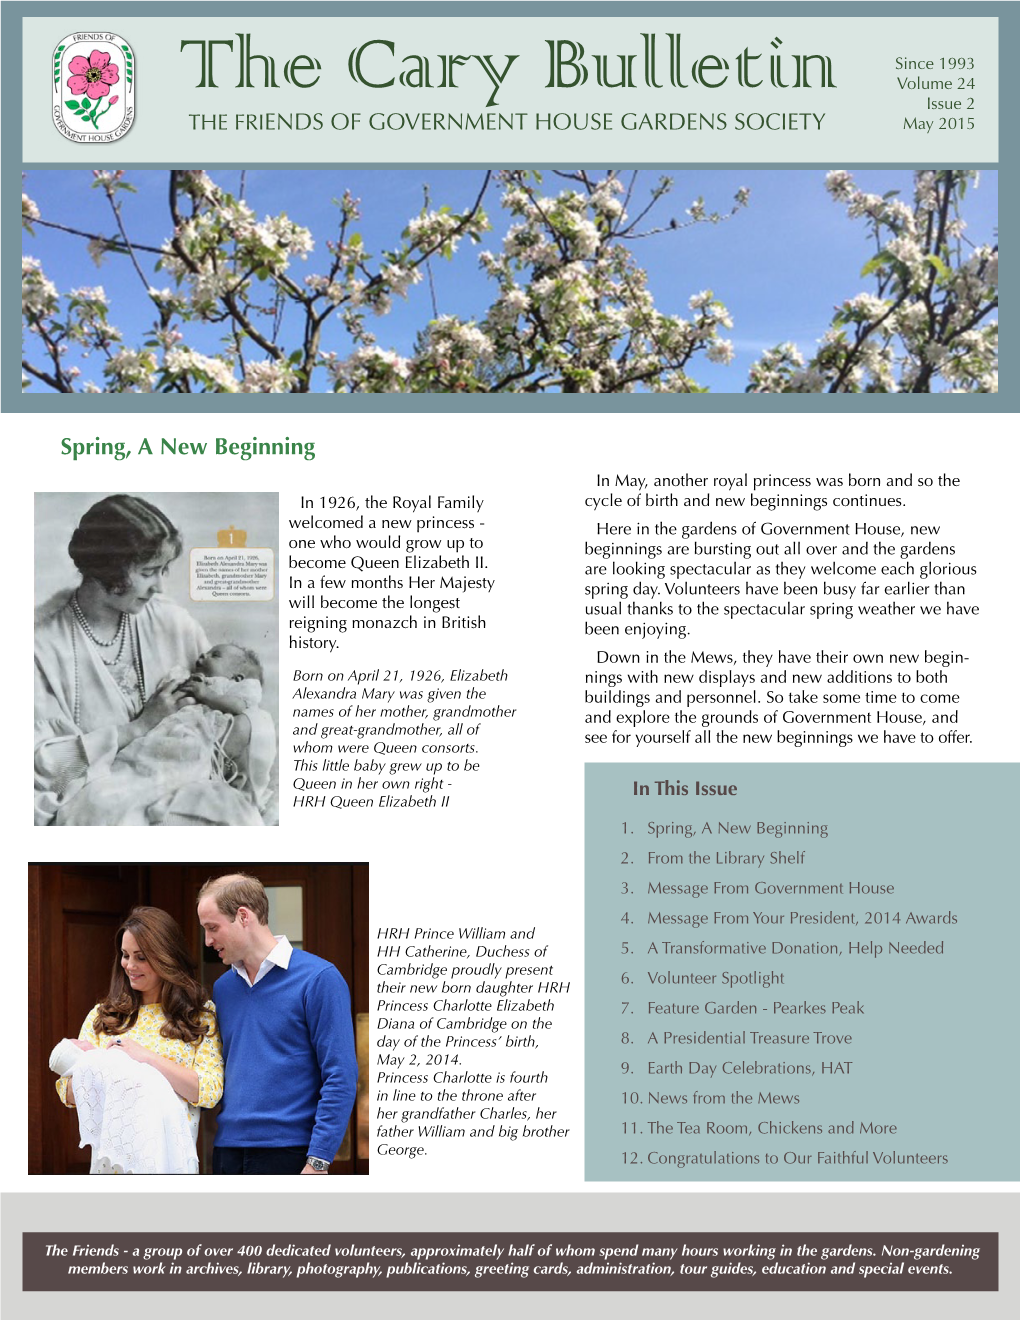 The Cary Bulletin Issue 2 the FRIENDS of GOVERNMENT HOUSE GARDENS SOCIETY May 2015